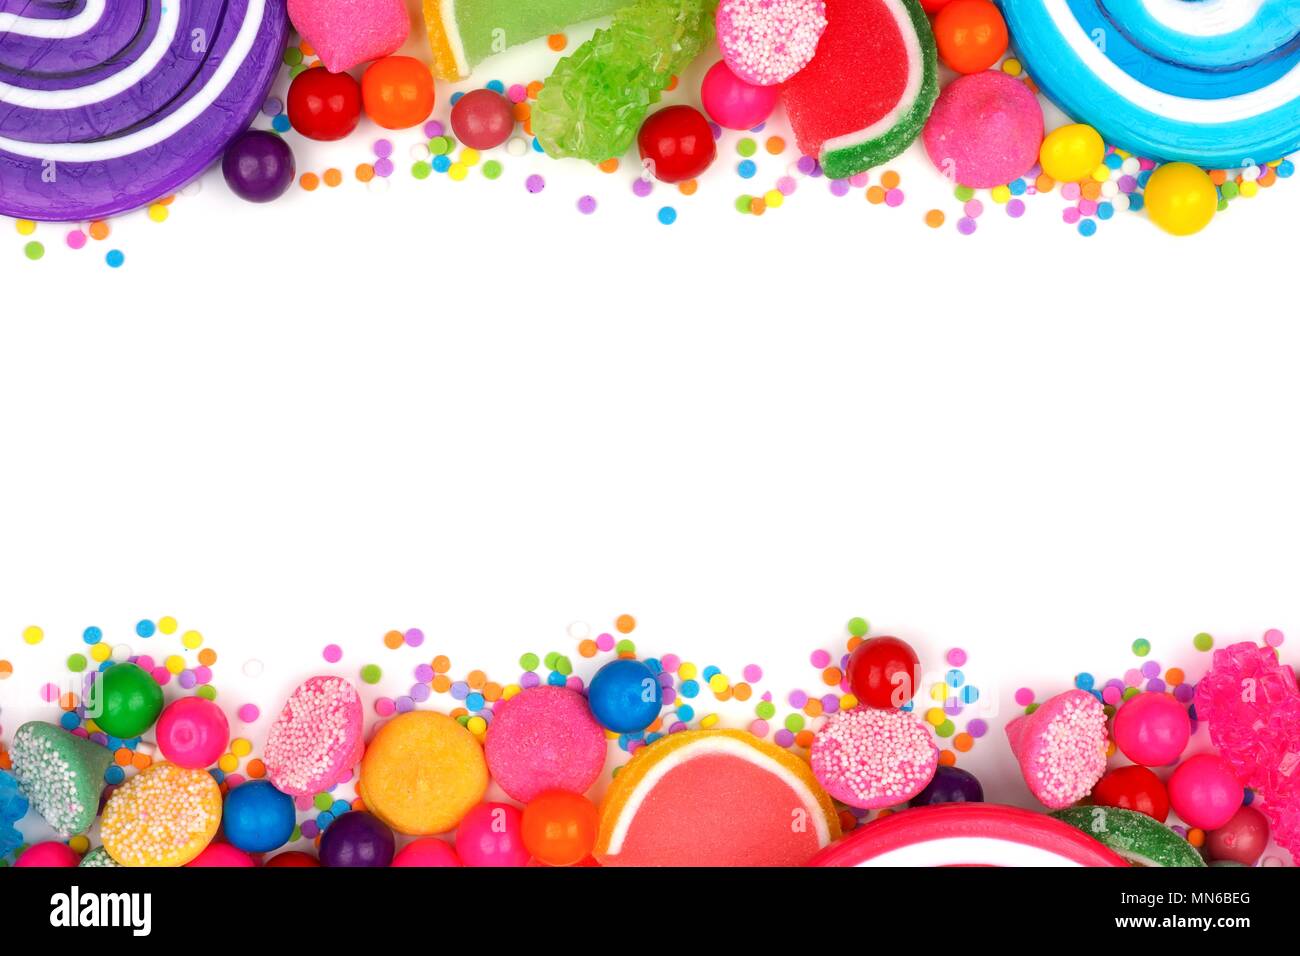 Double border of an assortment of colorful candies against a white background Stock Photo